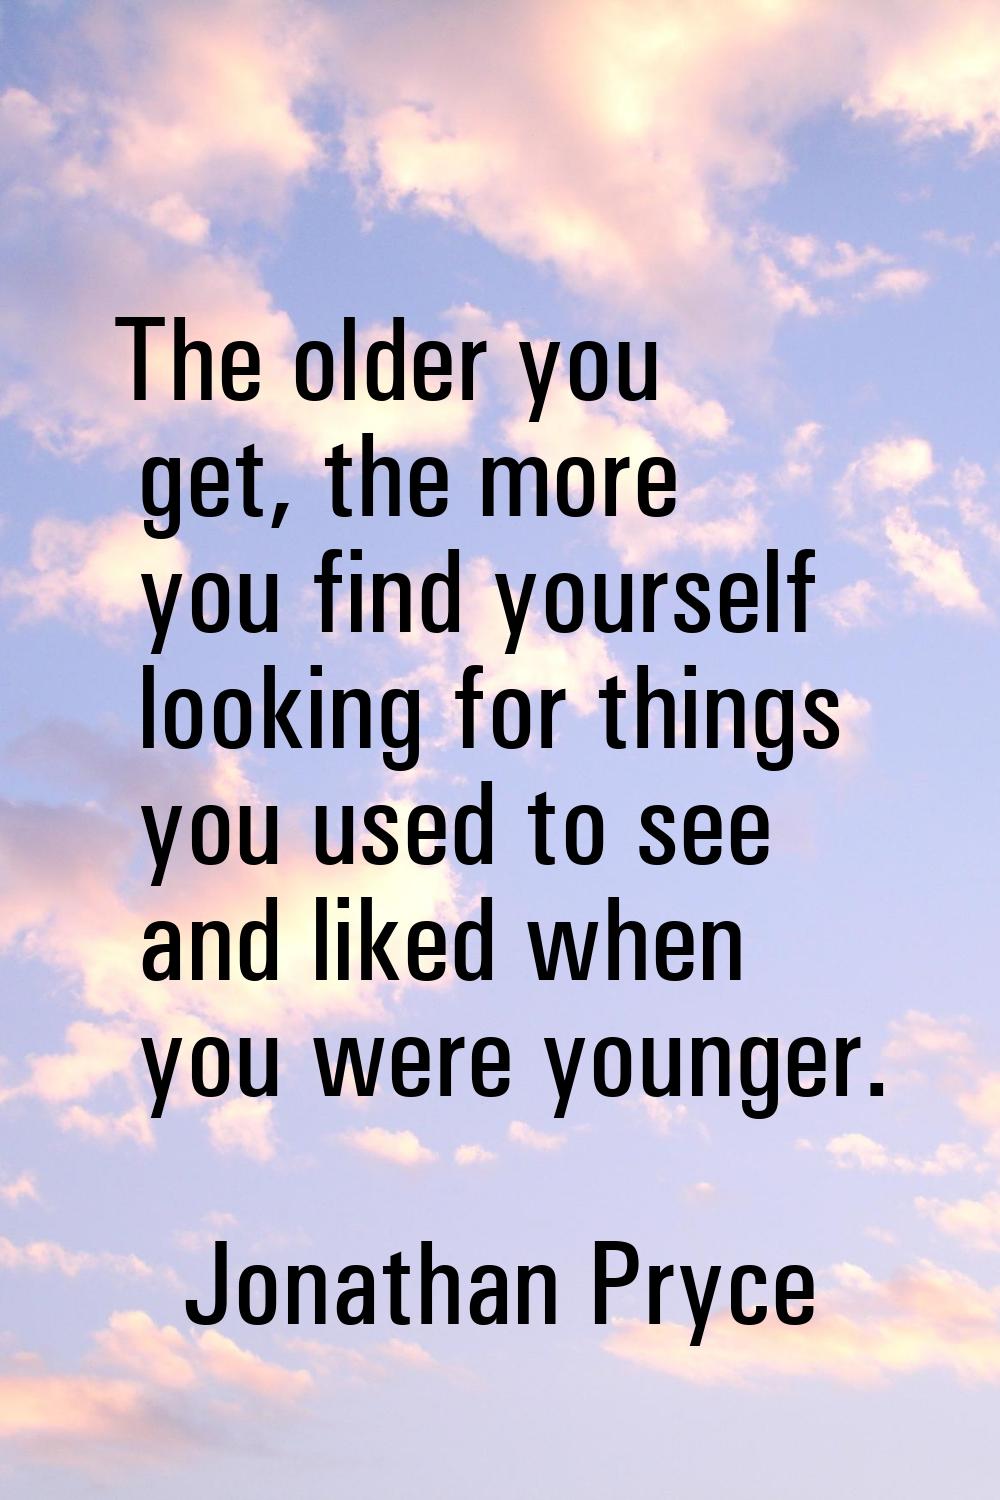 The older you get, the more you find yourself looking for things you used to see and liked when you